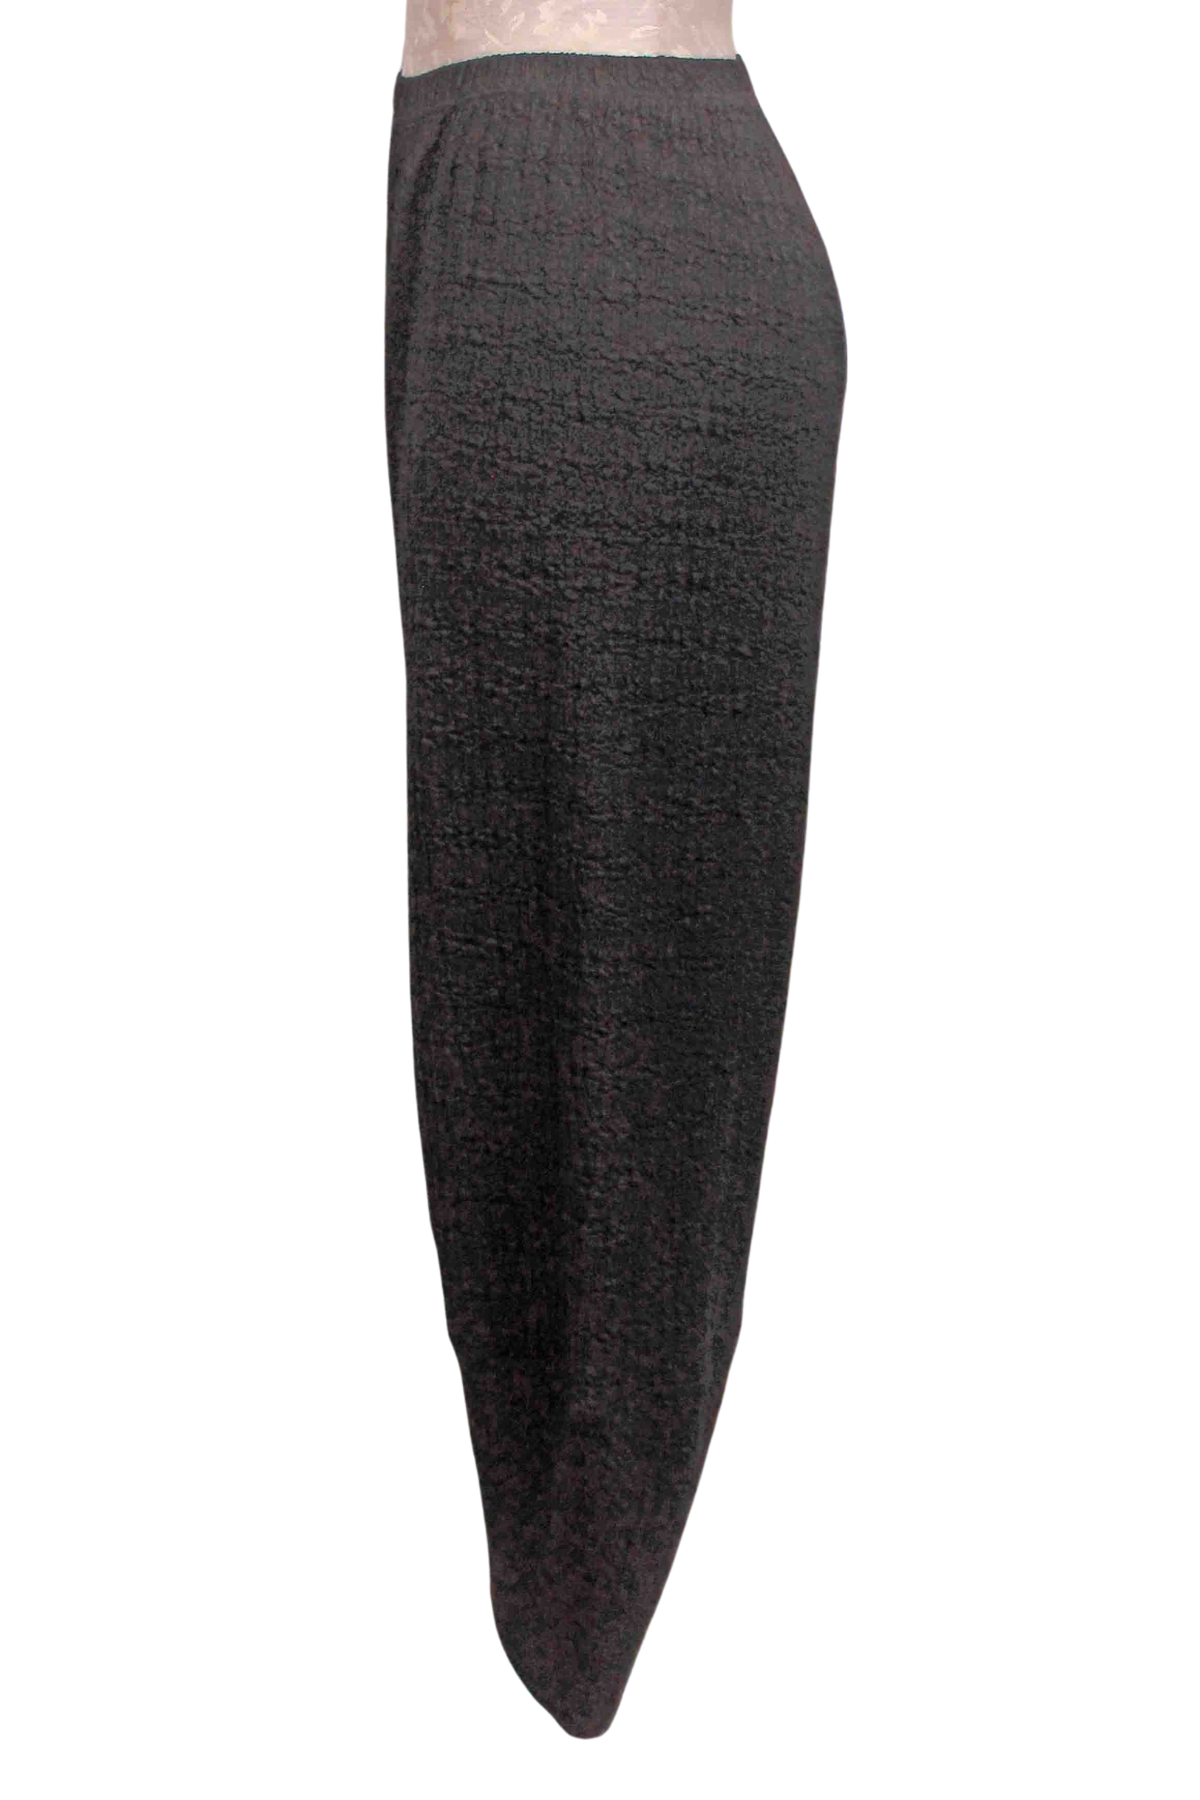 side view of Black Wide Leg Capri Pant in Waffle Fabric by Inoah that Tapers down at the bottom